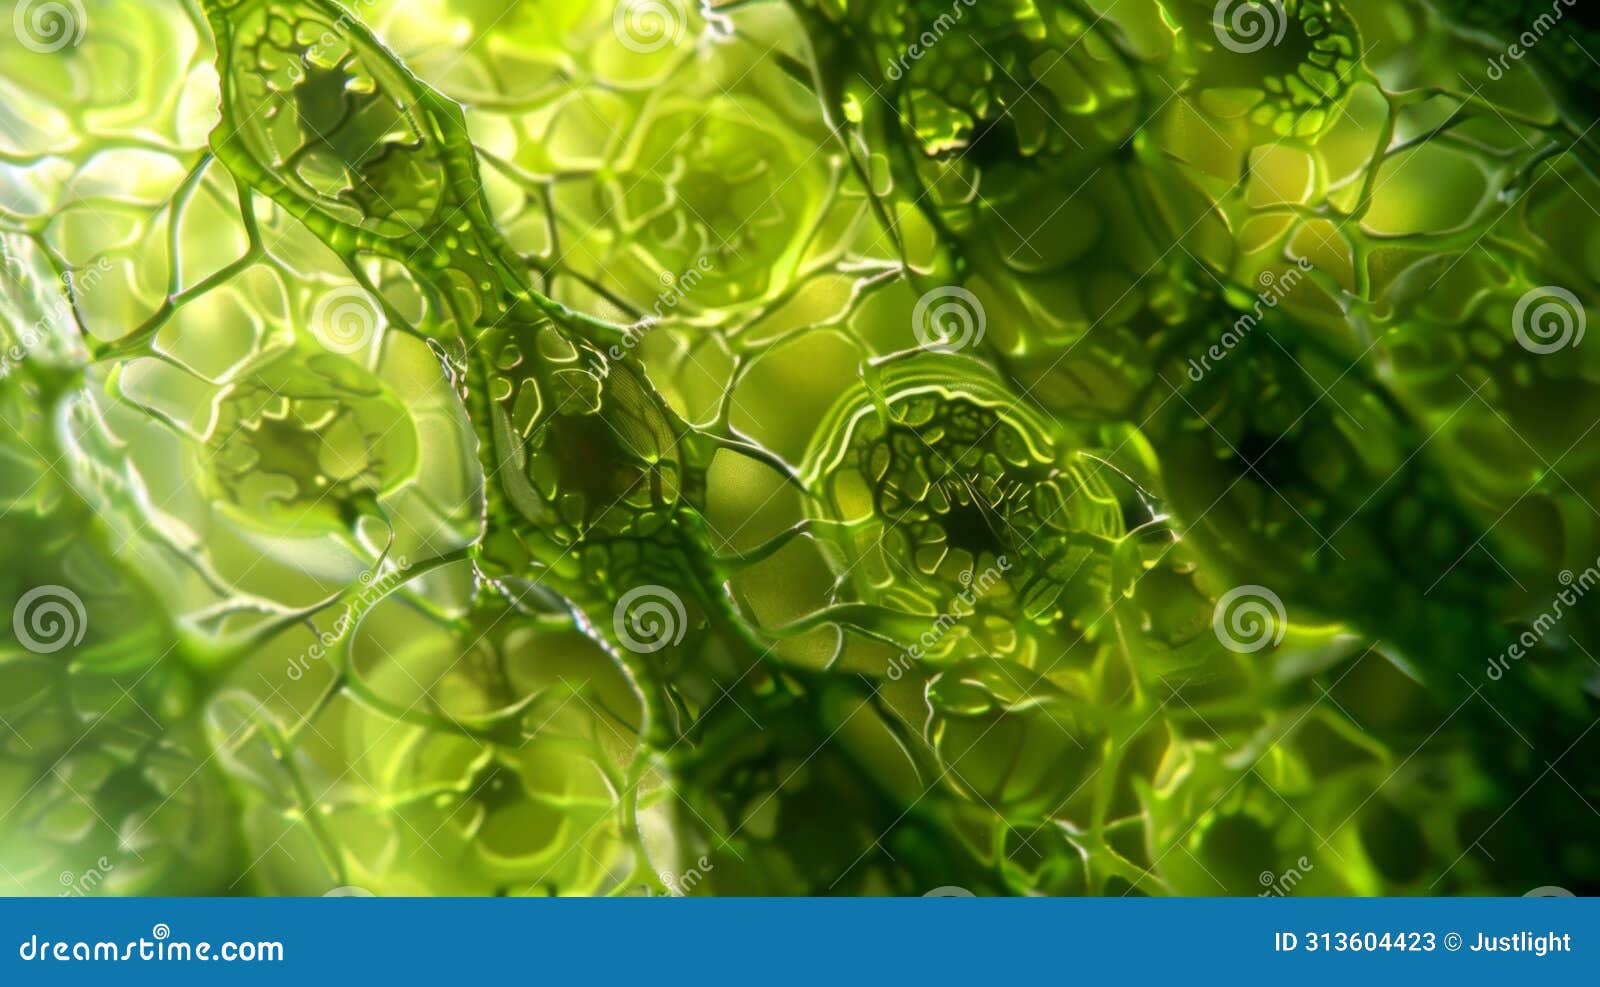 magnified image of a chloroplasts inner membrane showcasing the presence of embedded proteins and transporters for